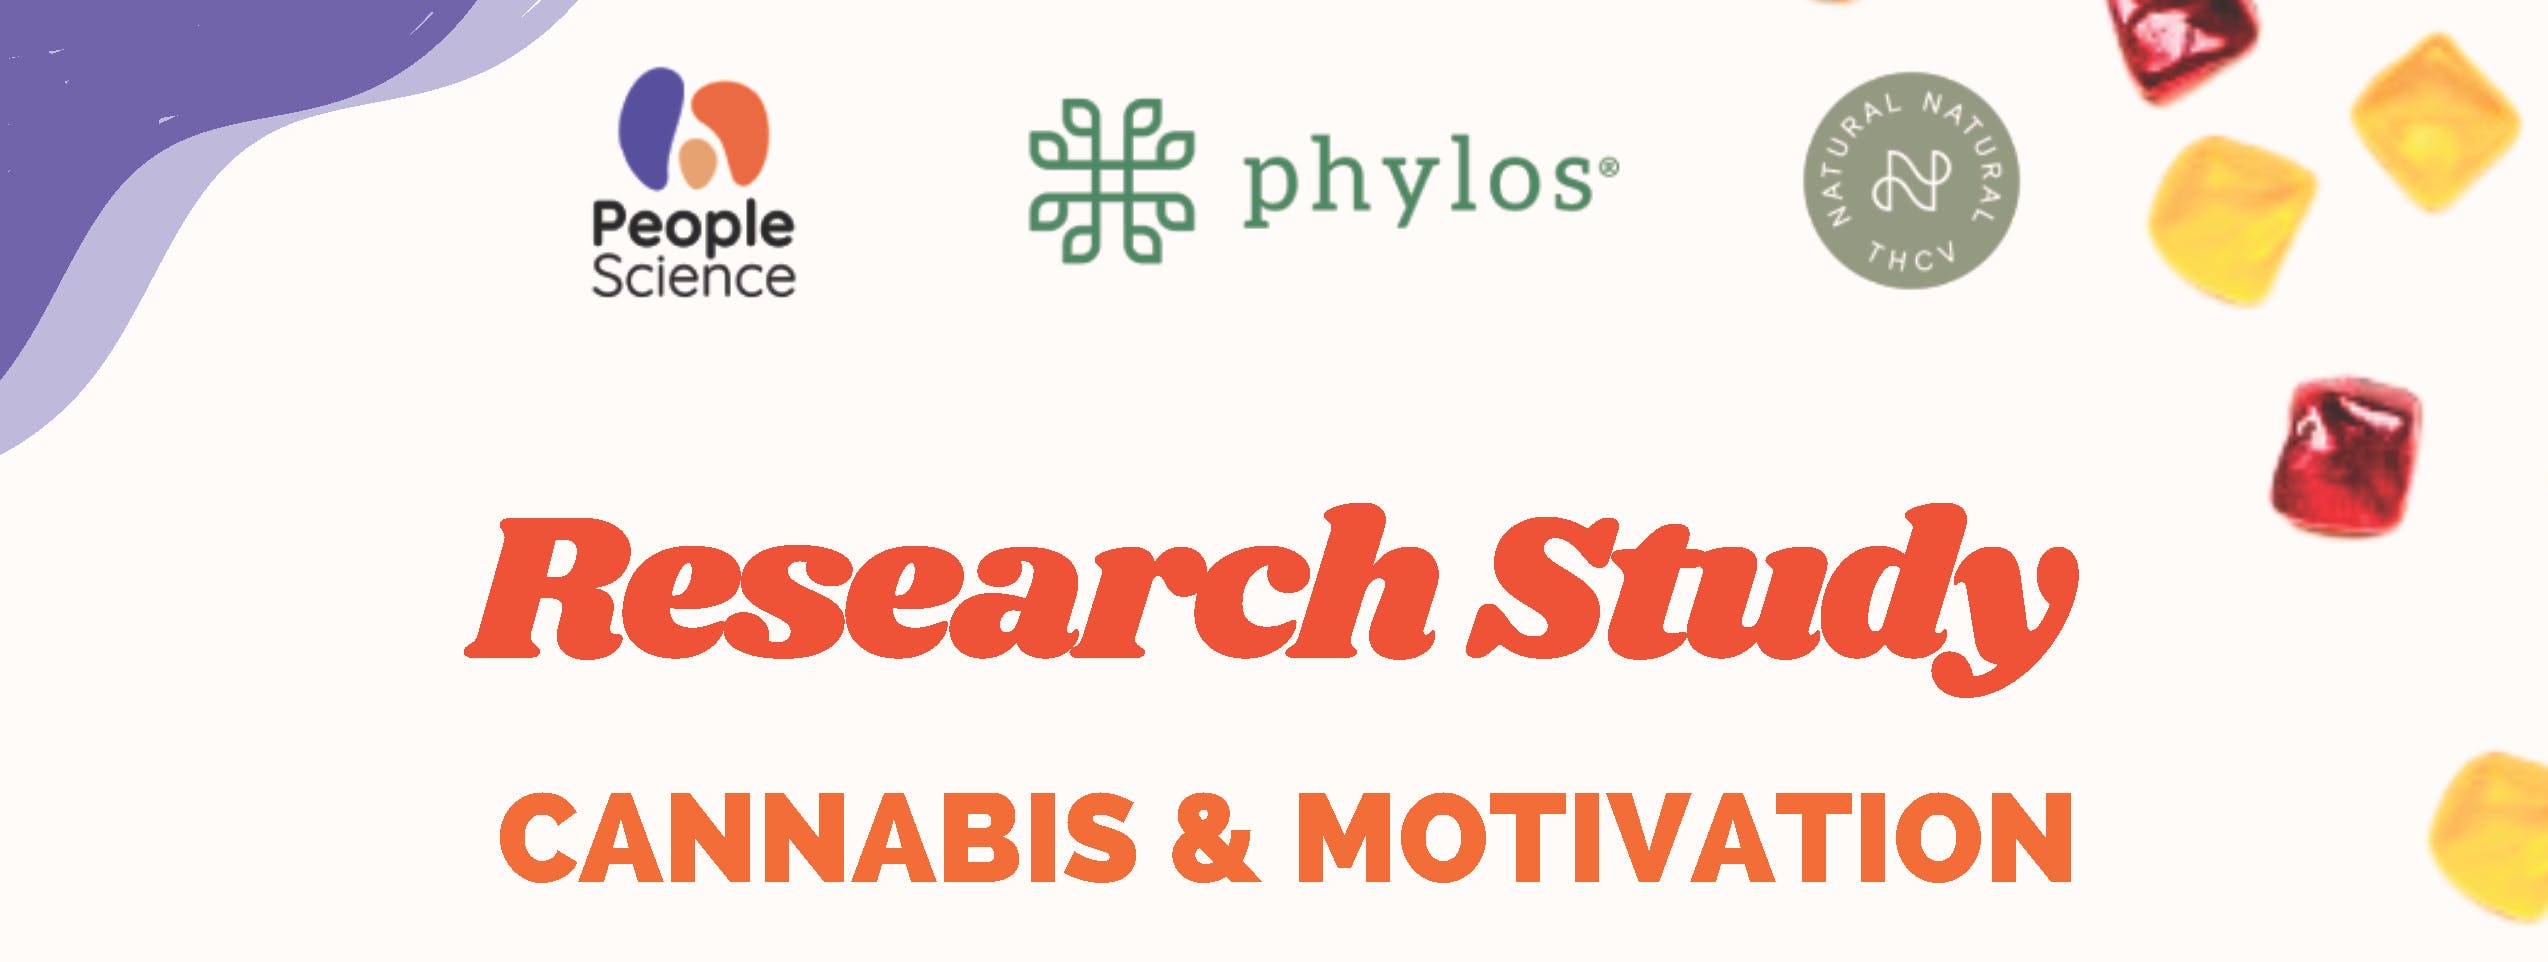 People Science logo, Phylos logo, Natural Natural THCV logo | Red lettering "Research Study" | Orange lettering " Cannabis & Motivation"